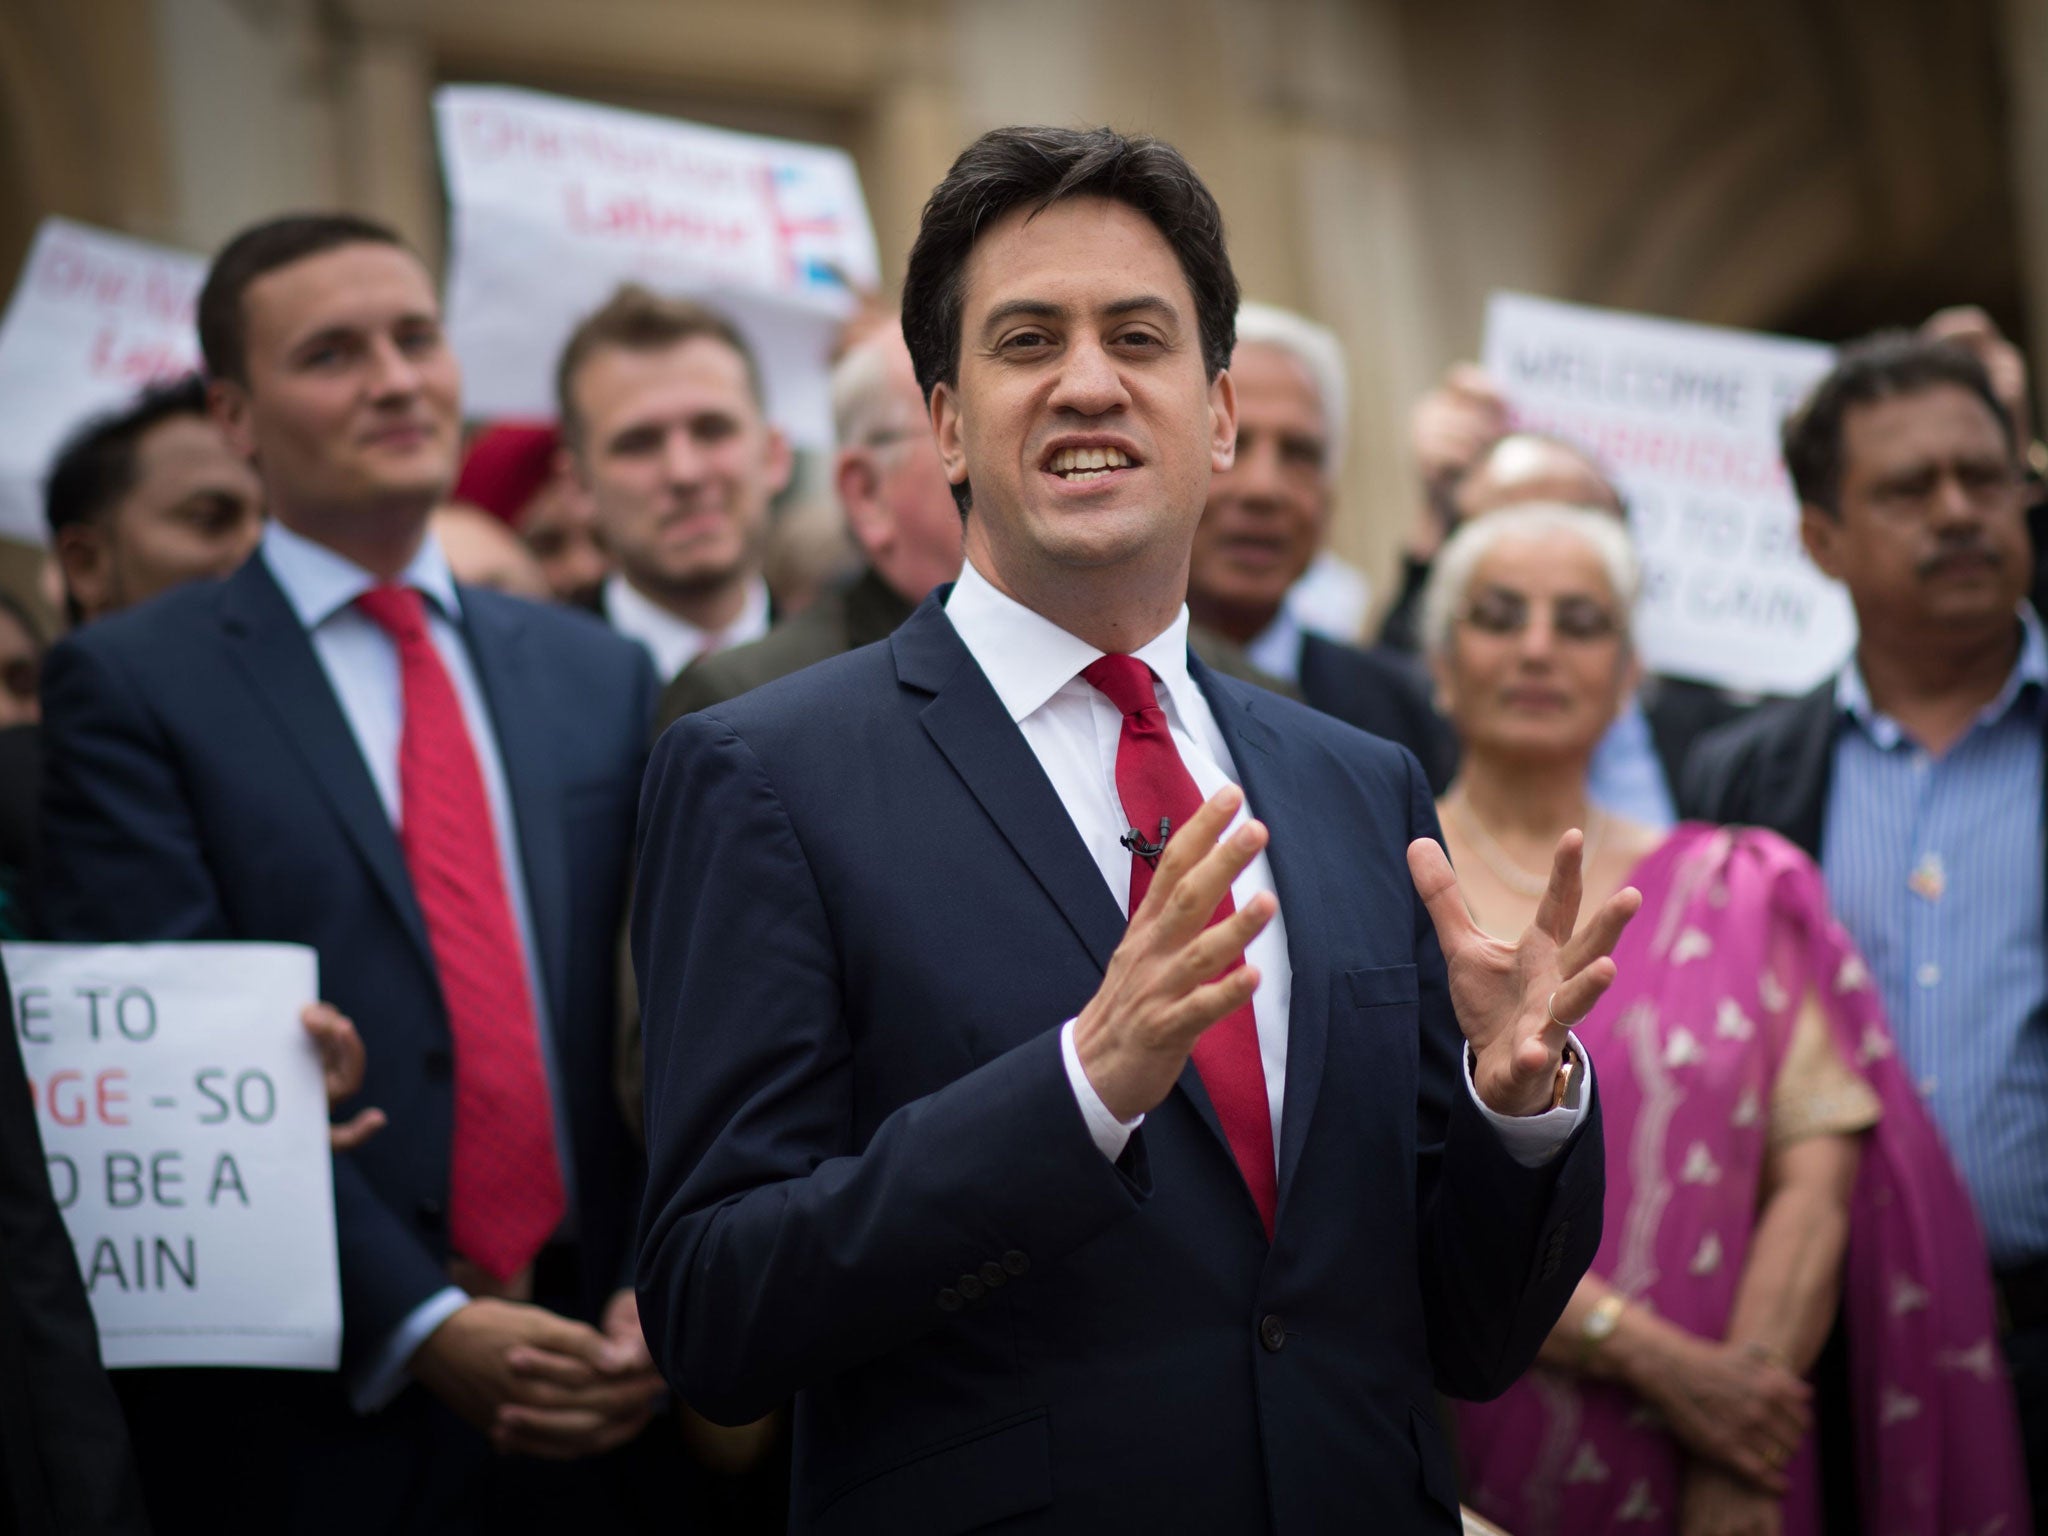 Labour leader Ed Miliband is greeted by supporters and councillors at Redbridge Town Hall in Ilford, Essex